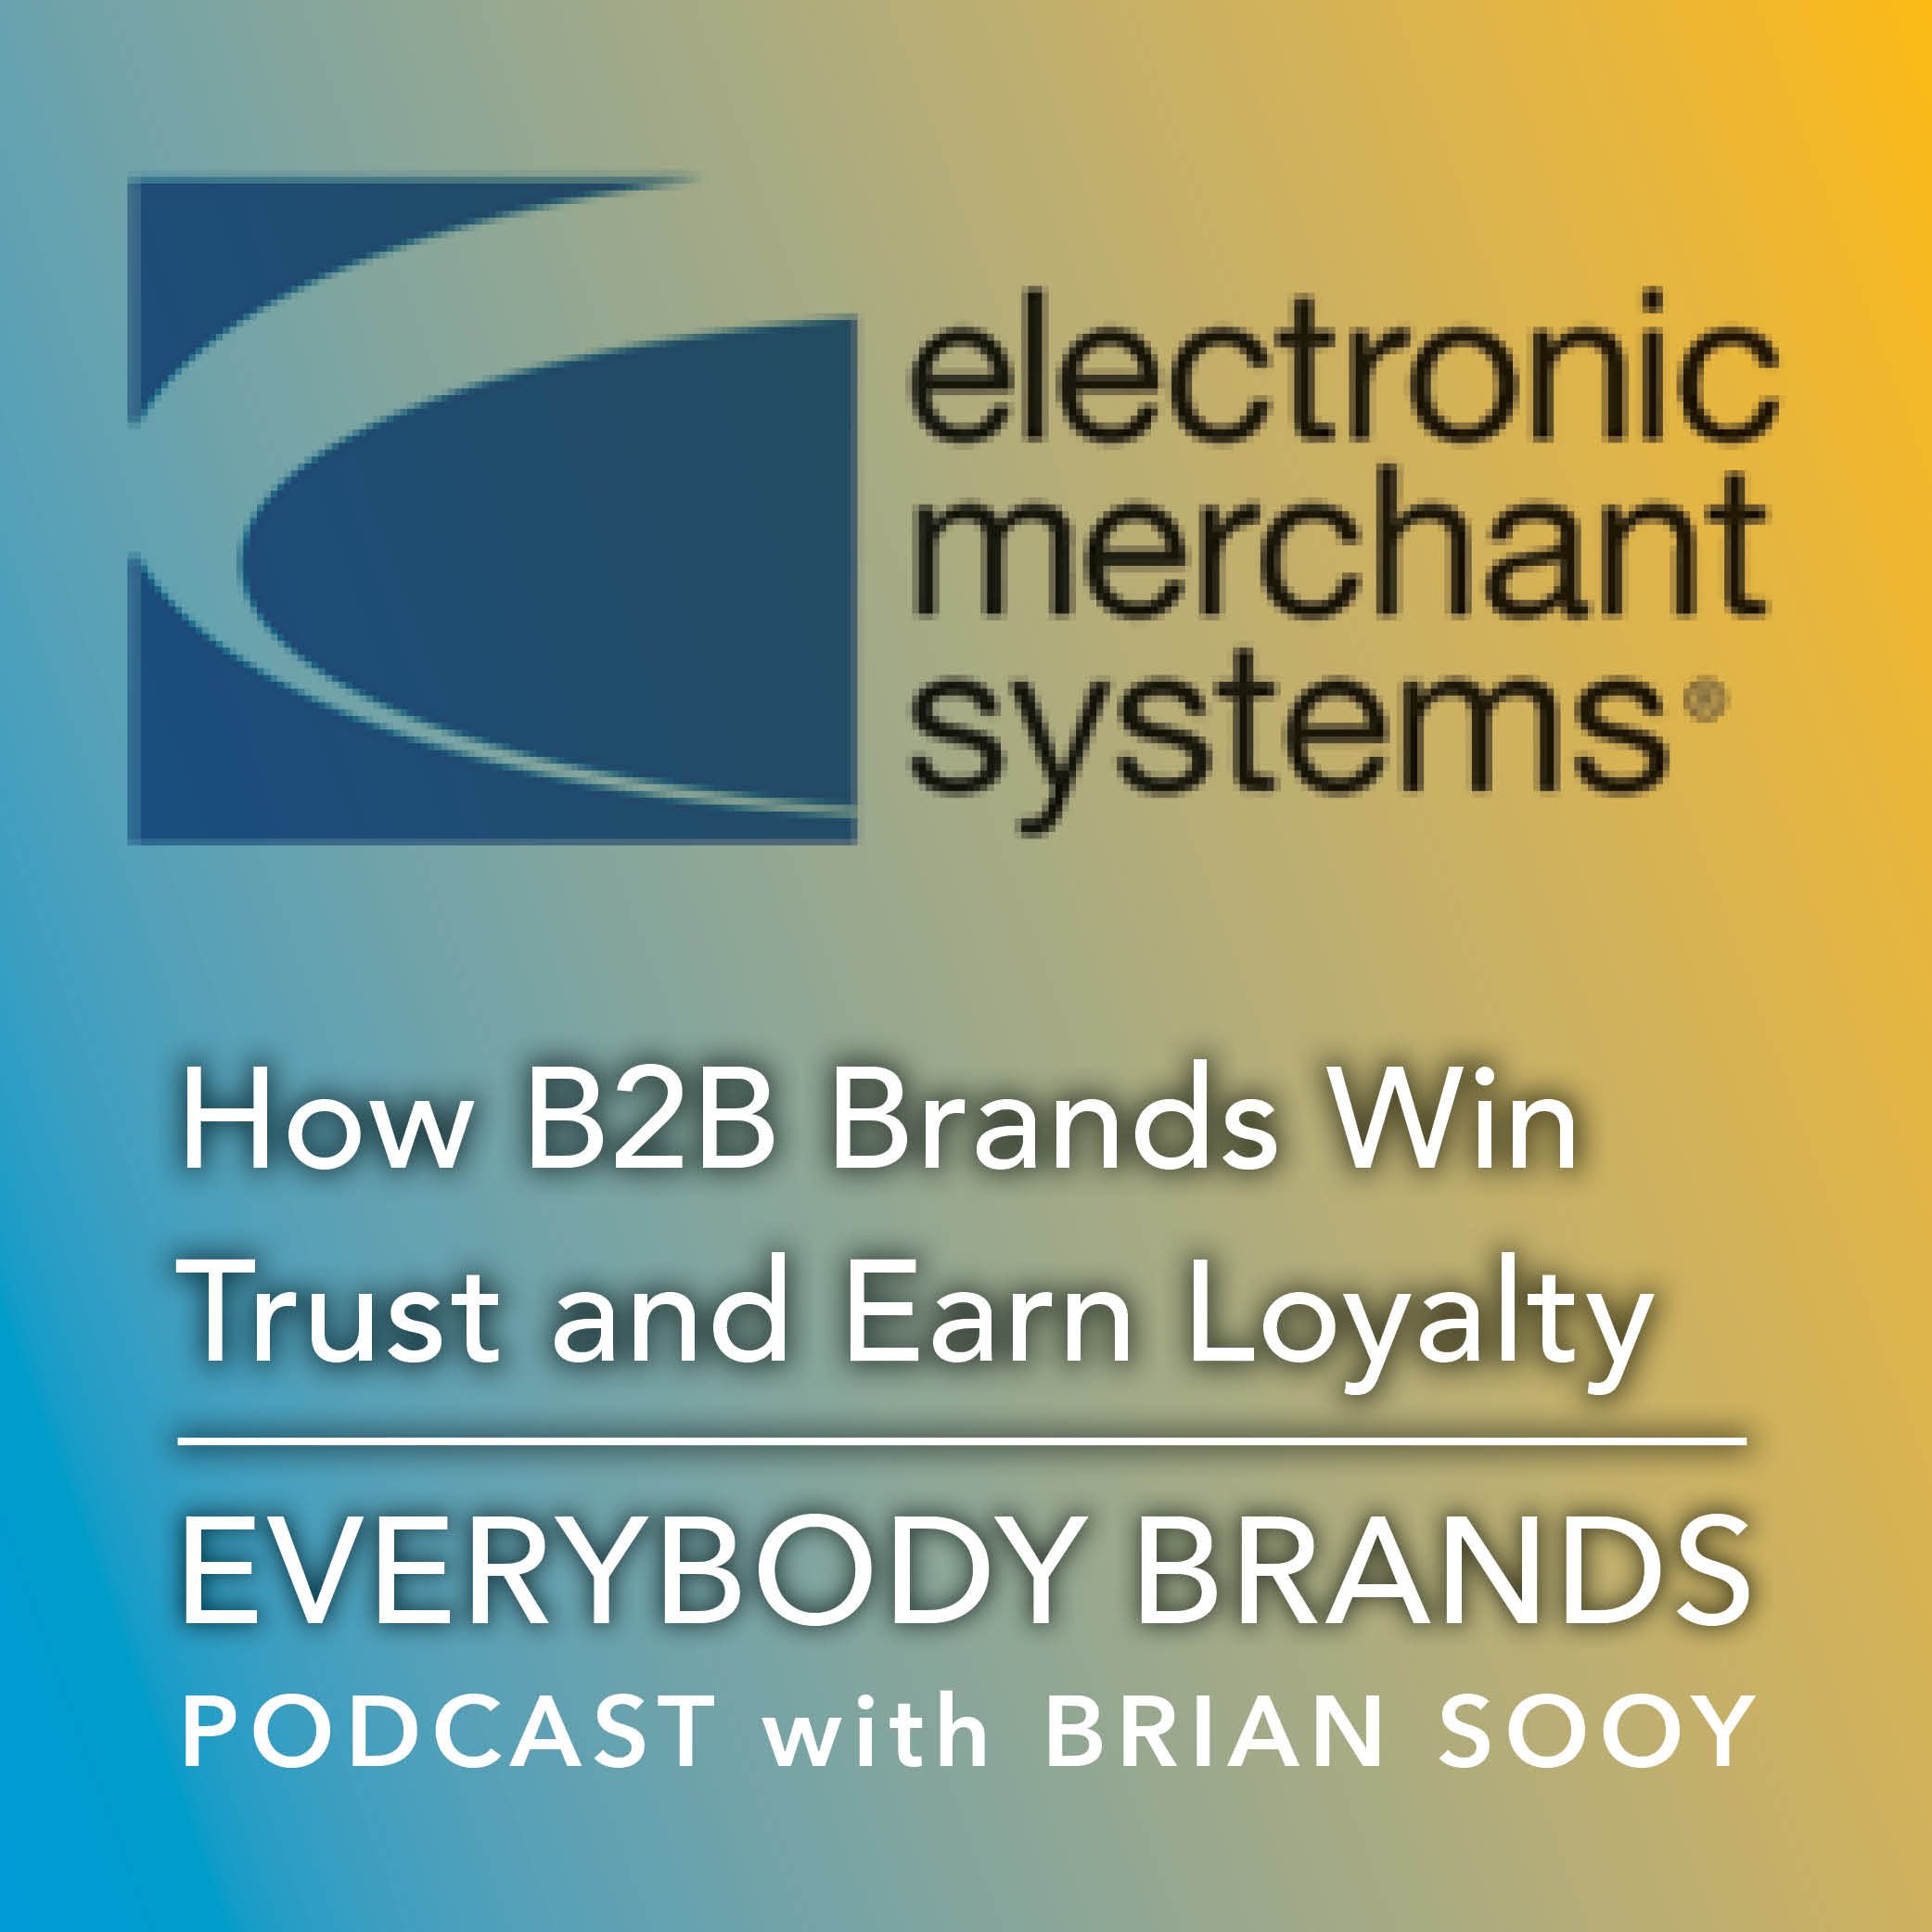 How B2B Brands Win Trust and Earn Loyalty